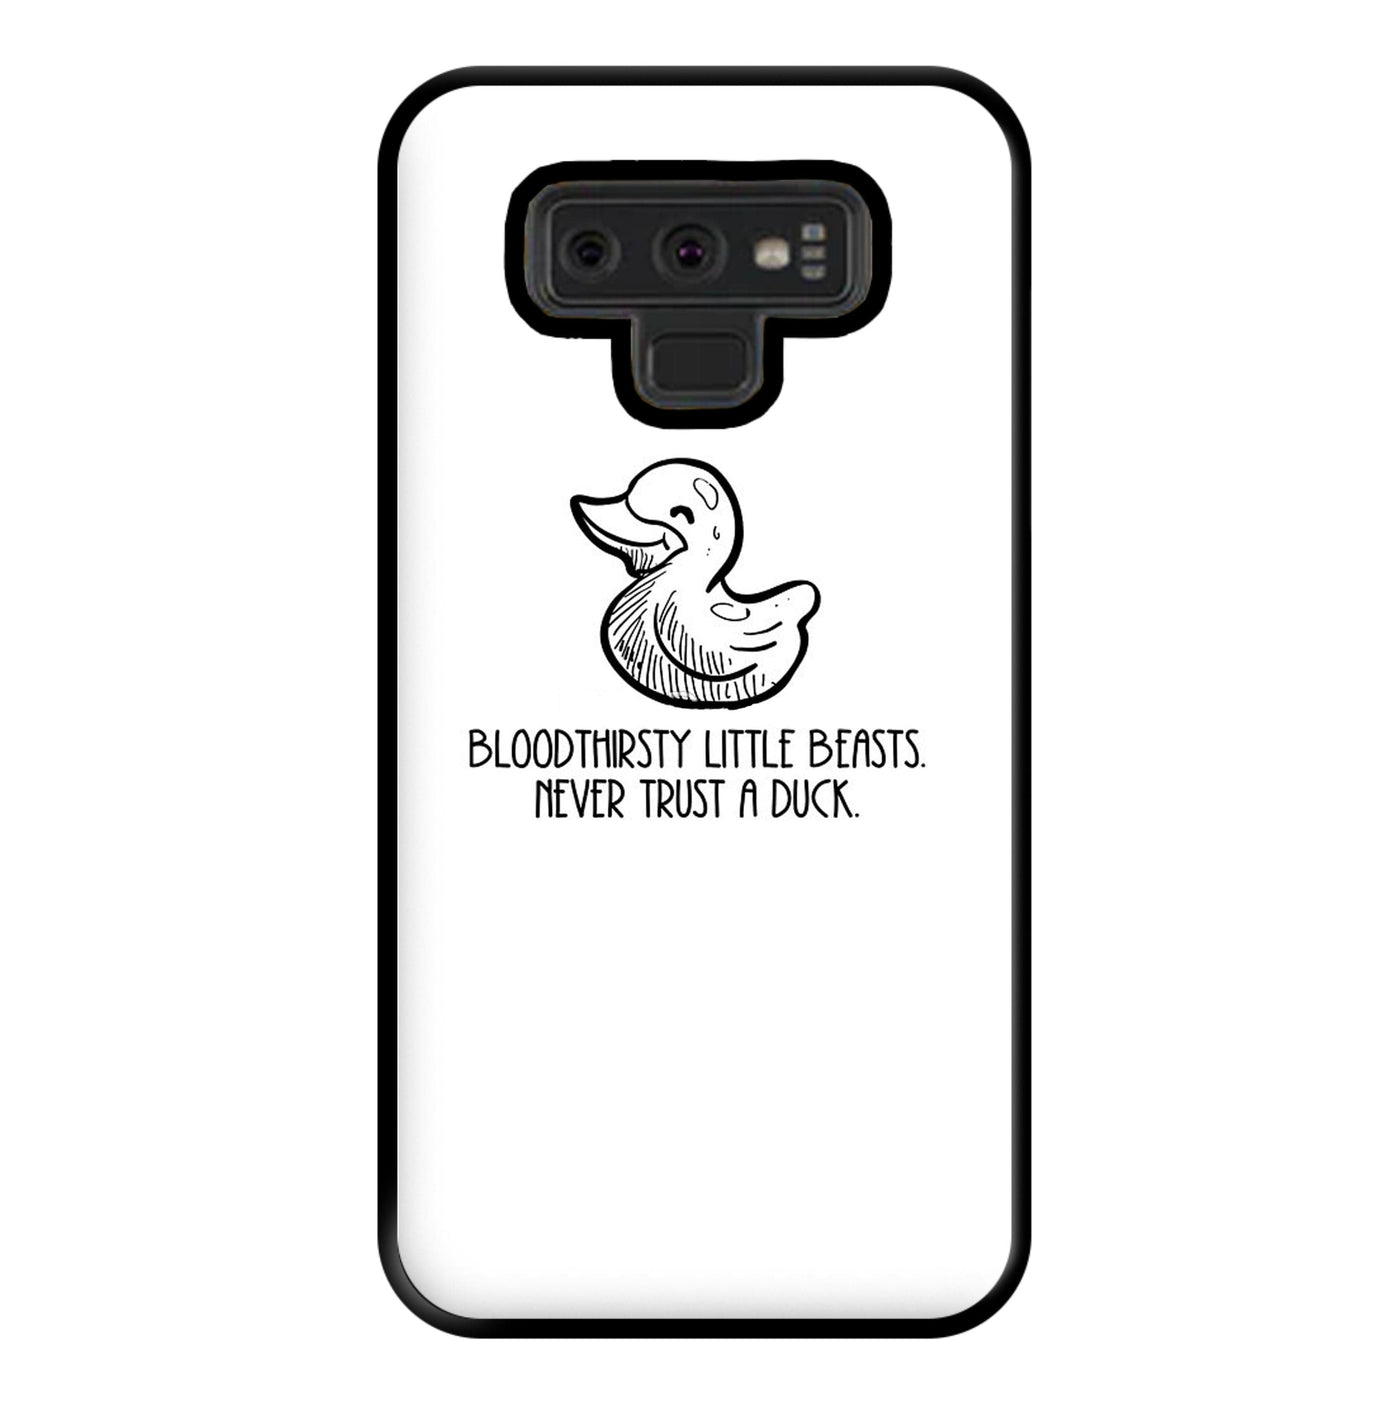 Bloodythirsty Little Beasts Never Trust A Duck - Shadowhunters Phone Case